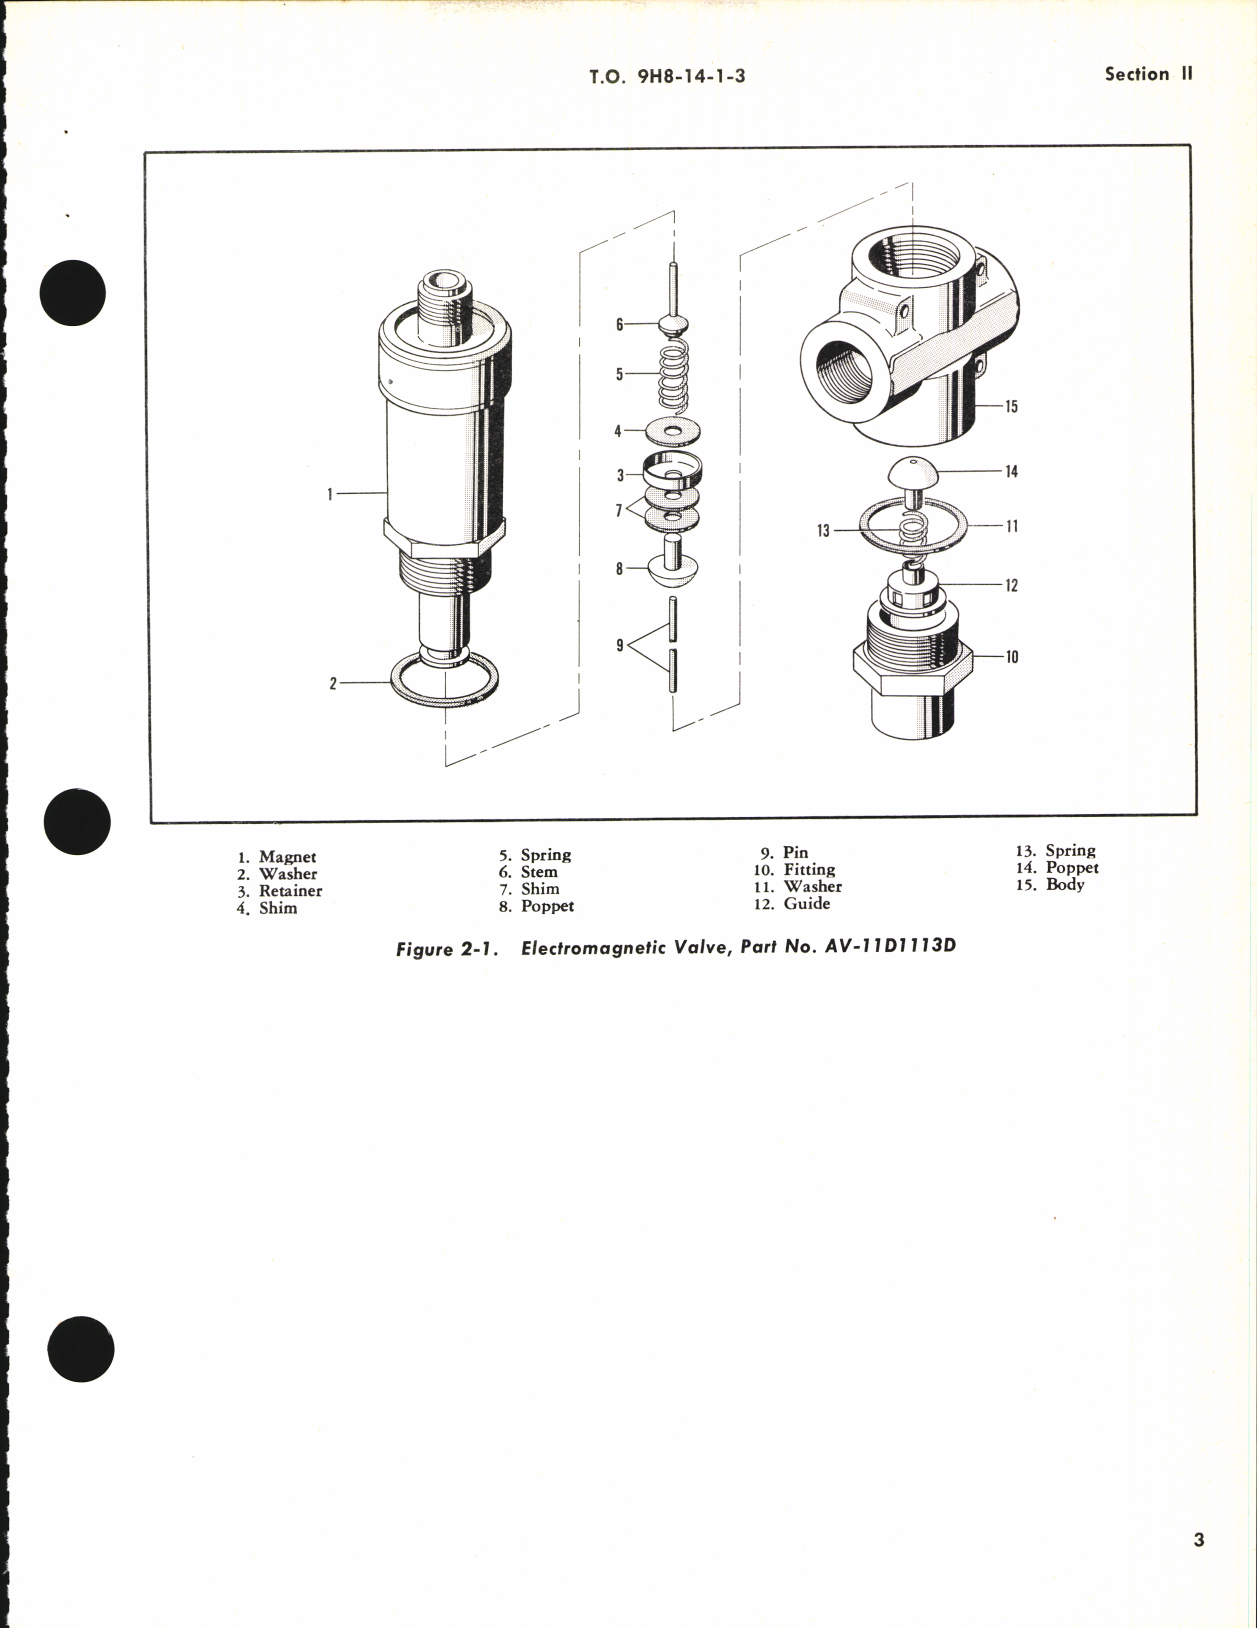 Sample page 7 from AirCorps Library document: Handbook of Overhaul Instructions for Electro Magnetic 3-way, Two Position Selector Valve